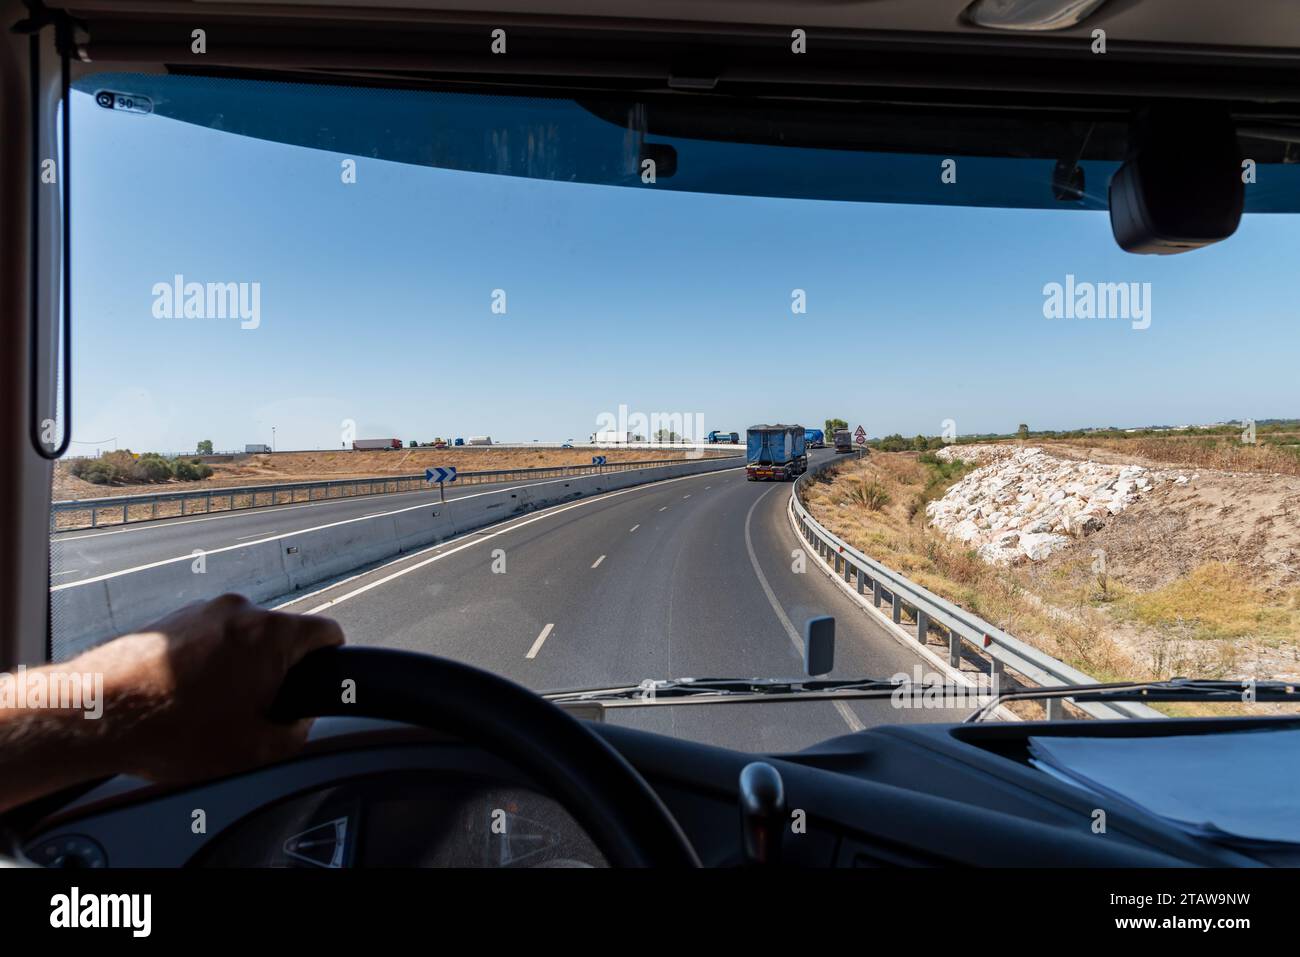 View from inside a truck of a curved road with a lot of heavy traffic in both directions. Stock Photo